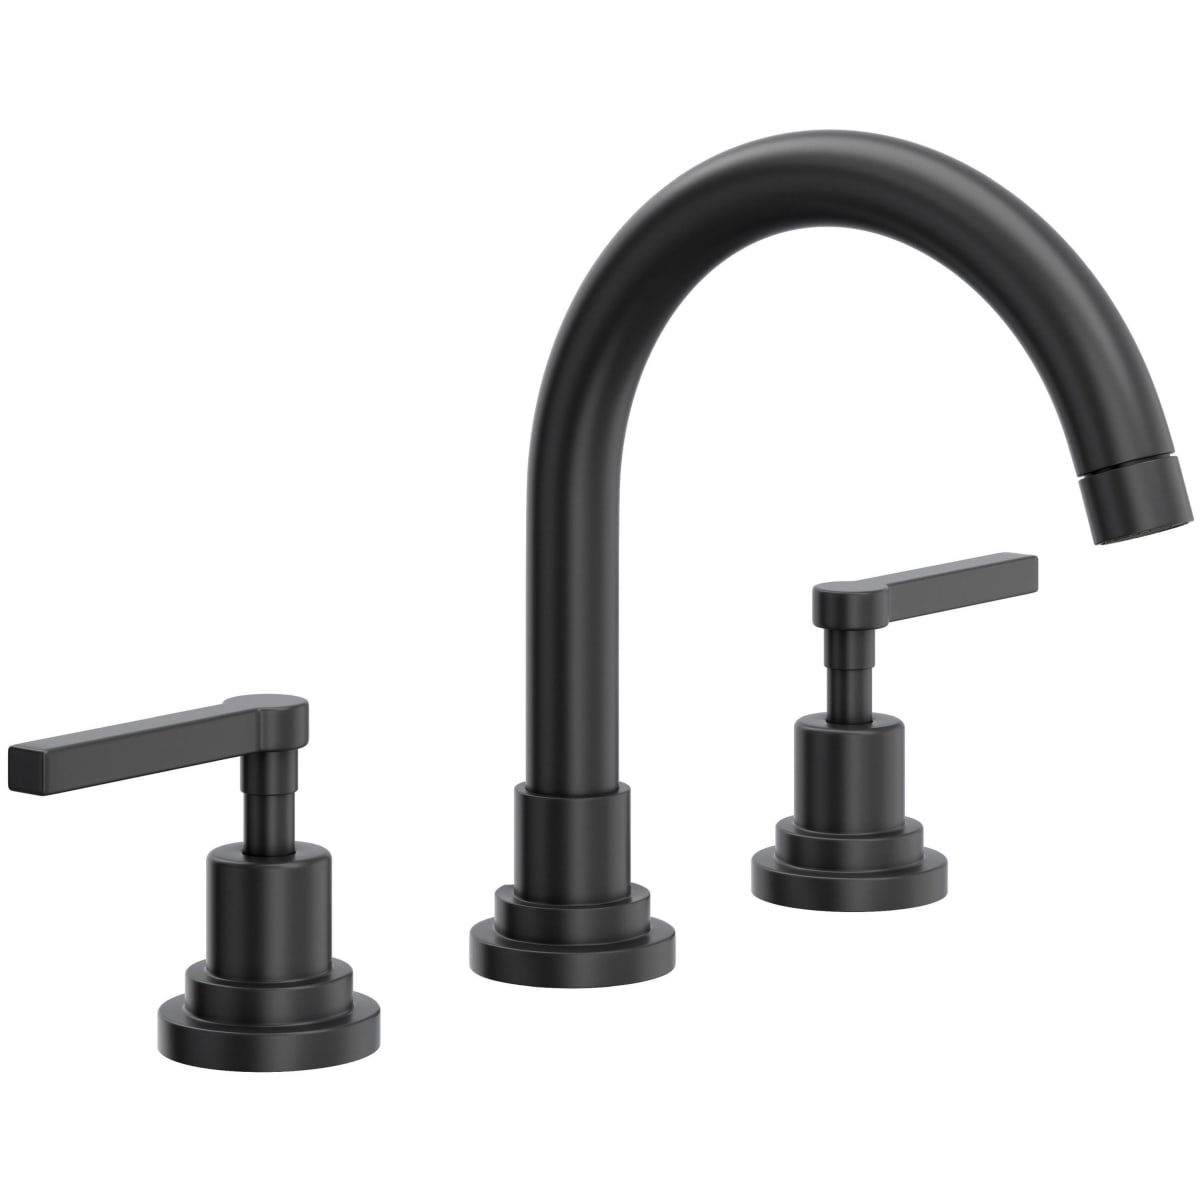 ROHL Lombardia Pulldown Kitchen Faucet - Italian Brass with Metal Lever  Handle